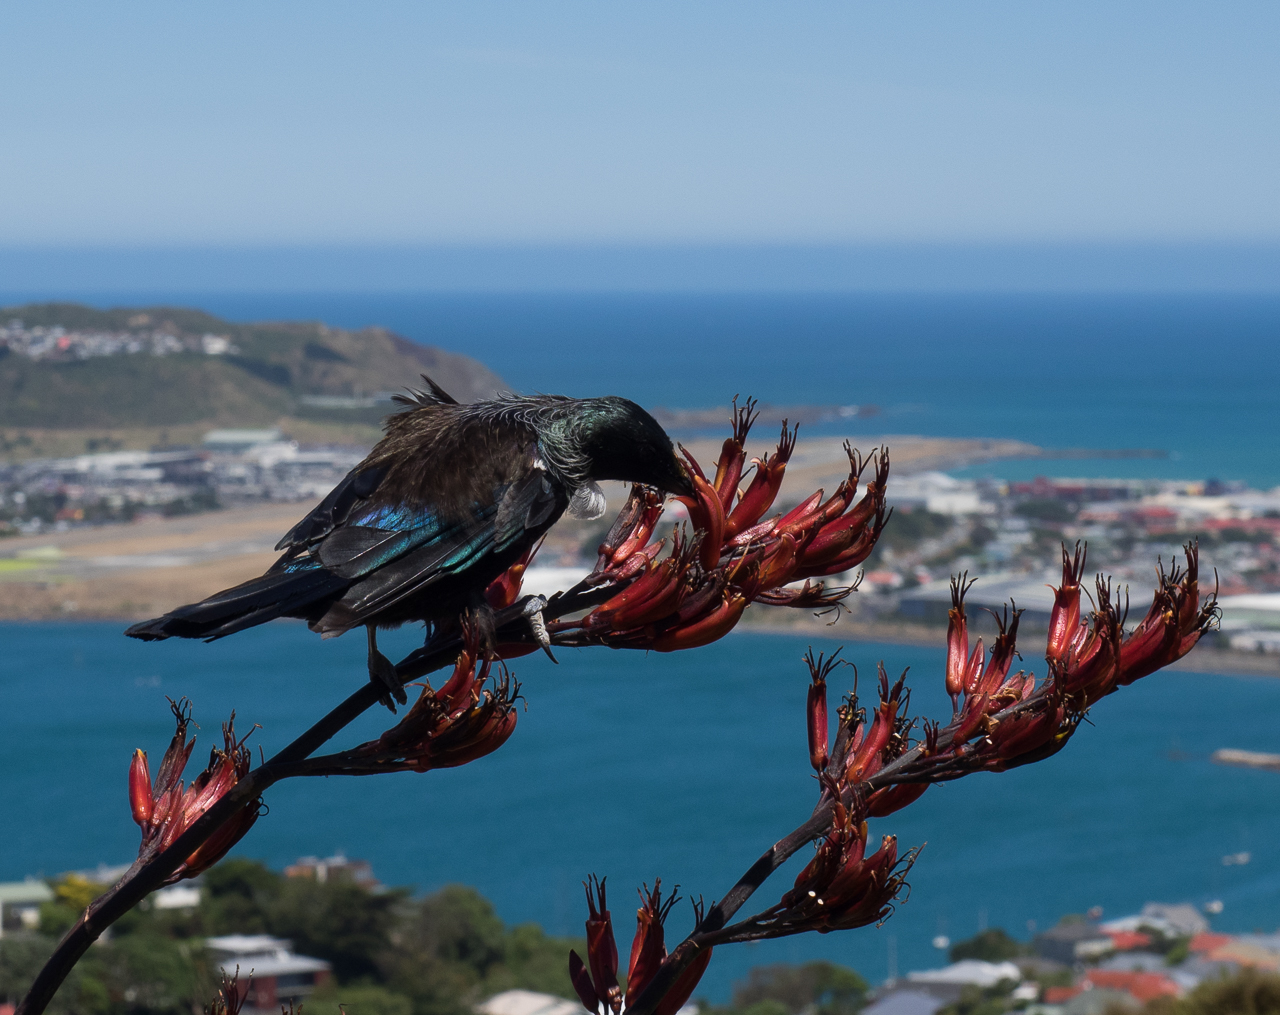 A tui in overlooking the airport